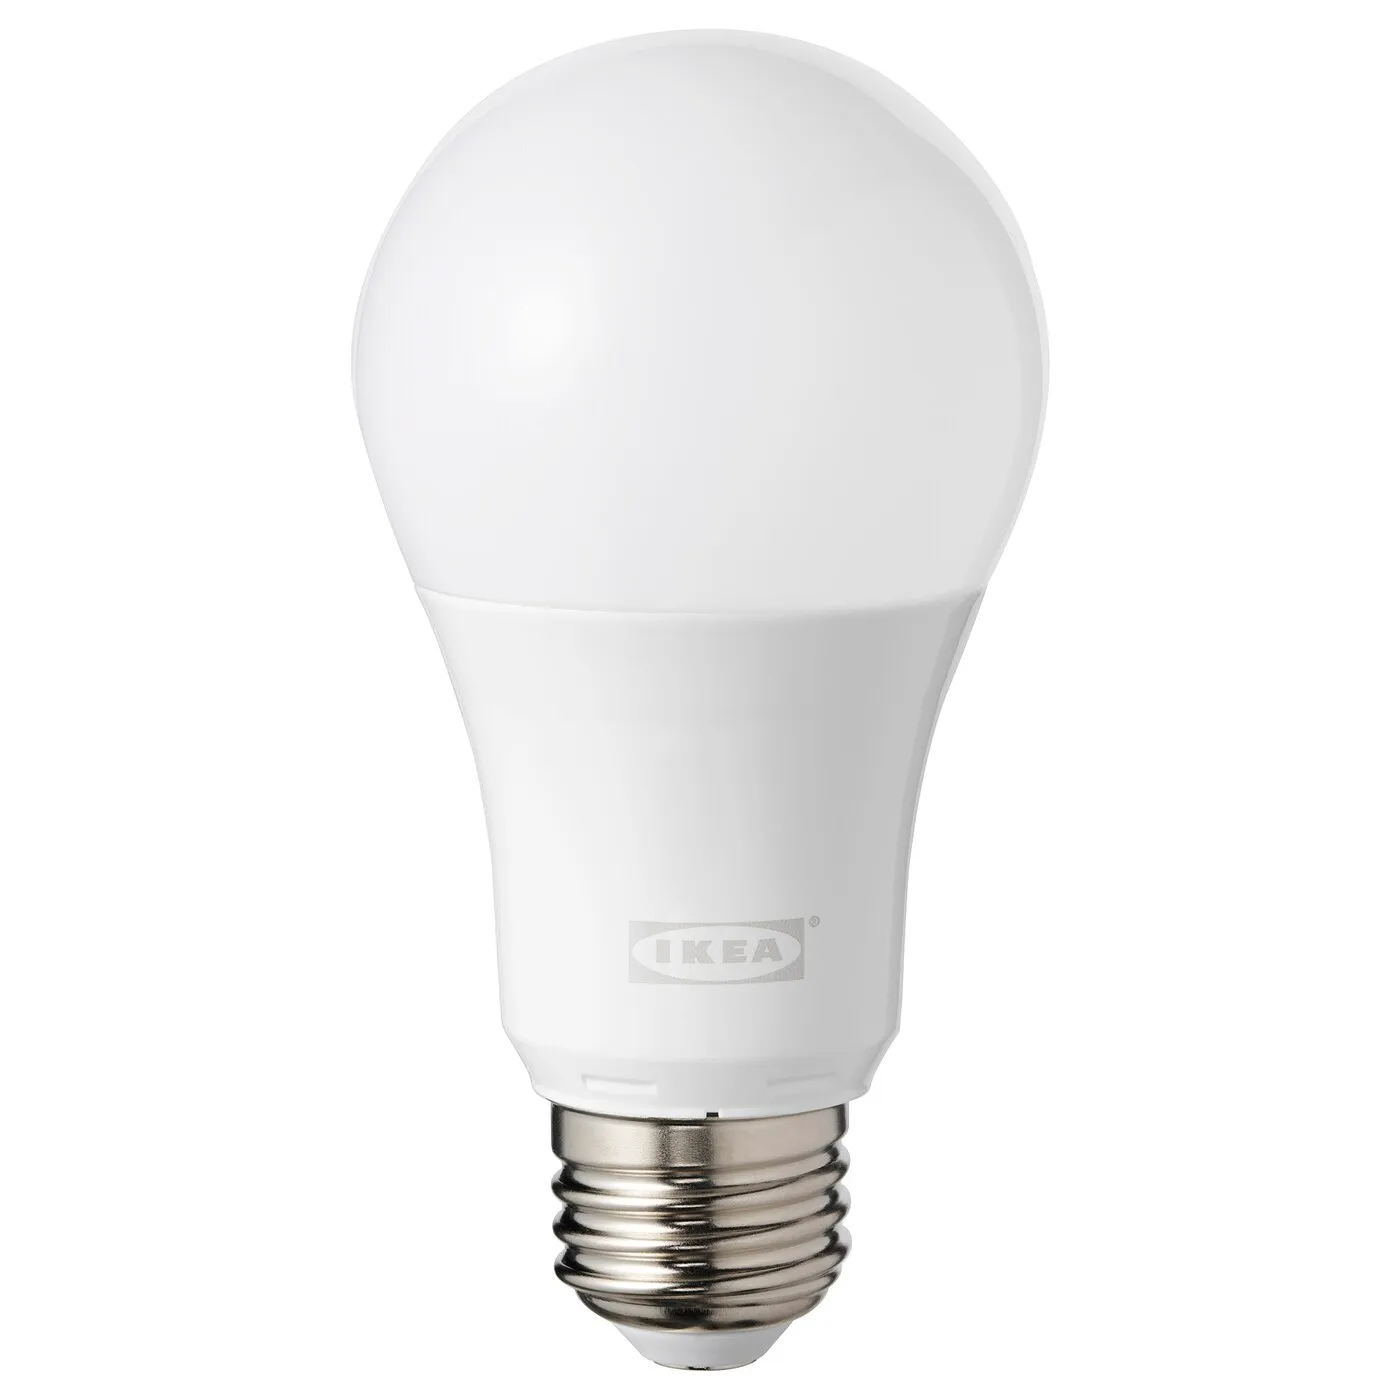 Tradfri LED bulb E26 600lm, dimmable color and white spectrum opal